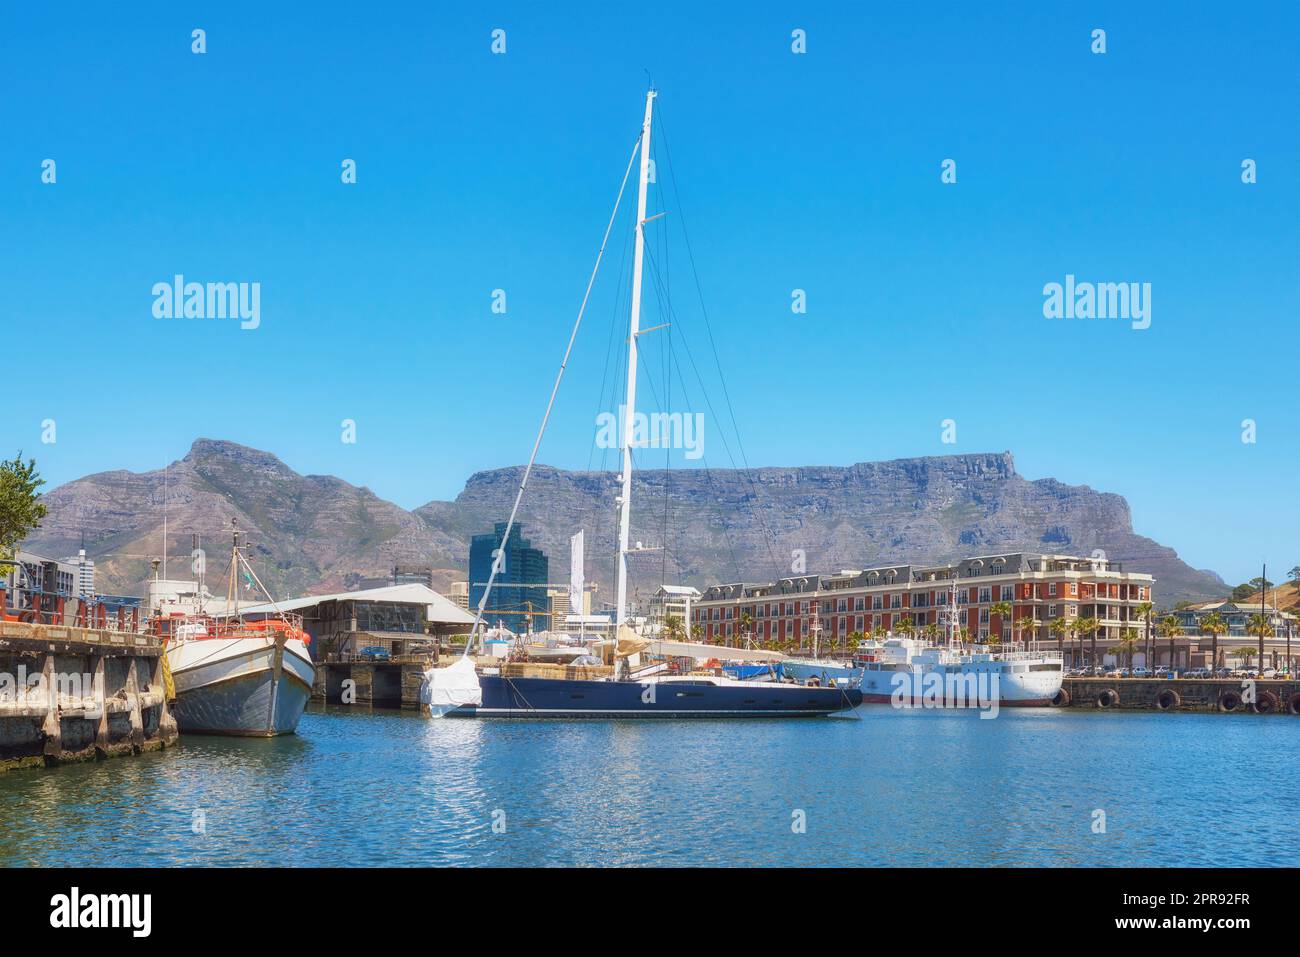 Sailboats docked at a harbor with Table Mountain in the background against blue sky with copy space. Scenic landscape of waterfront port at a marina dockyard. Nautical vessels for travel and tourism Stock Photo